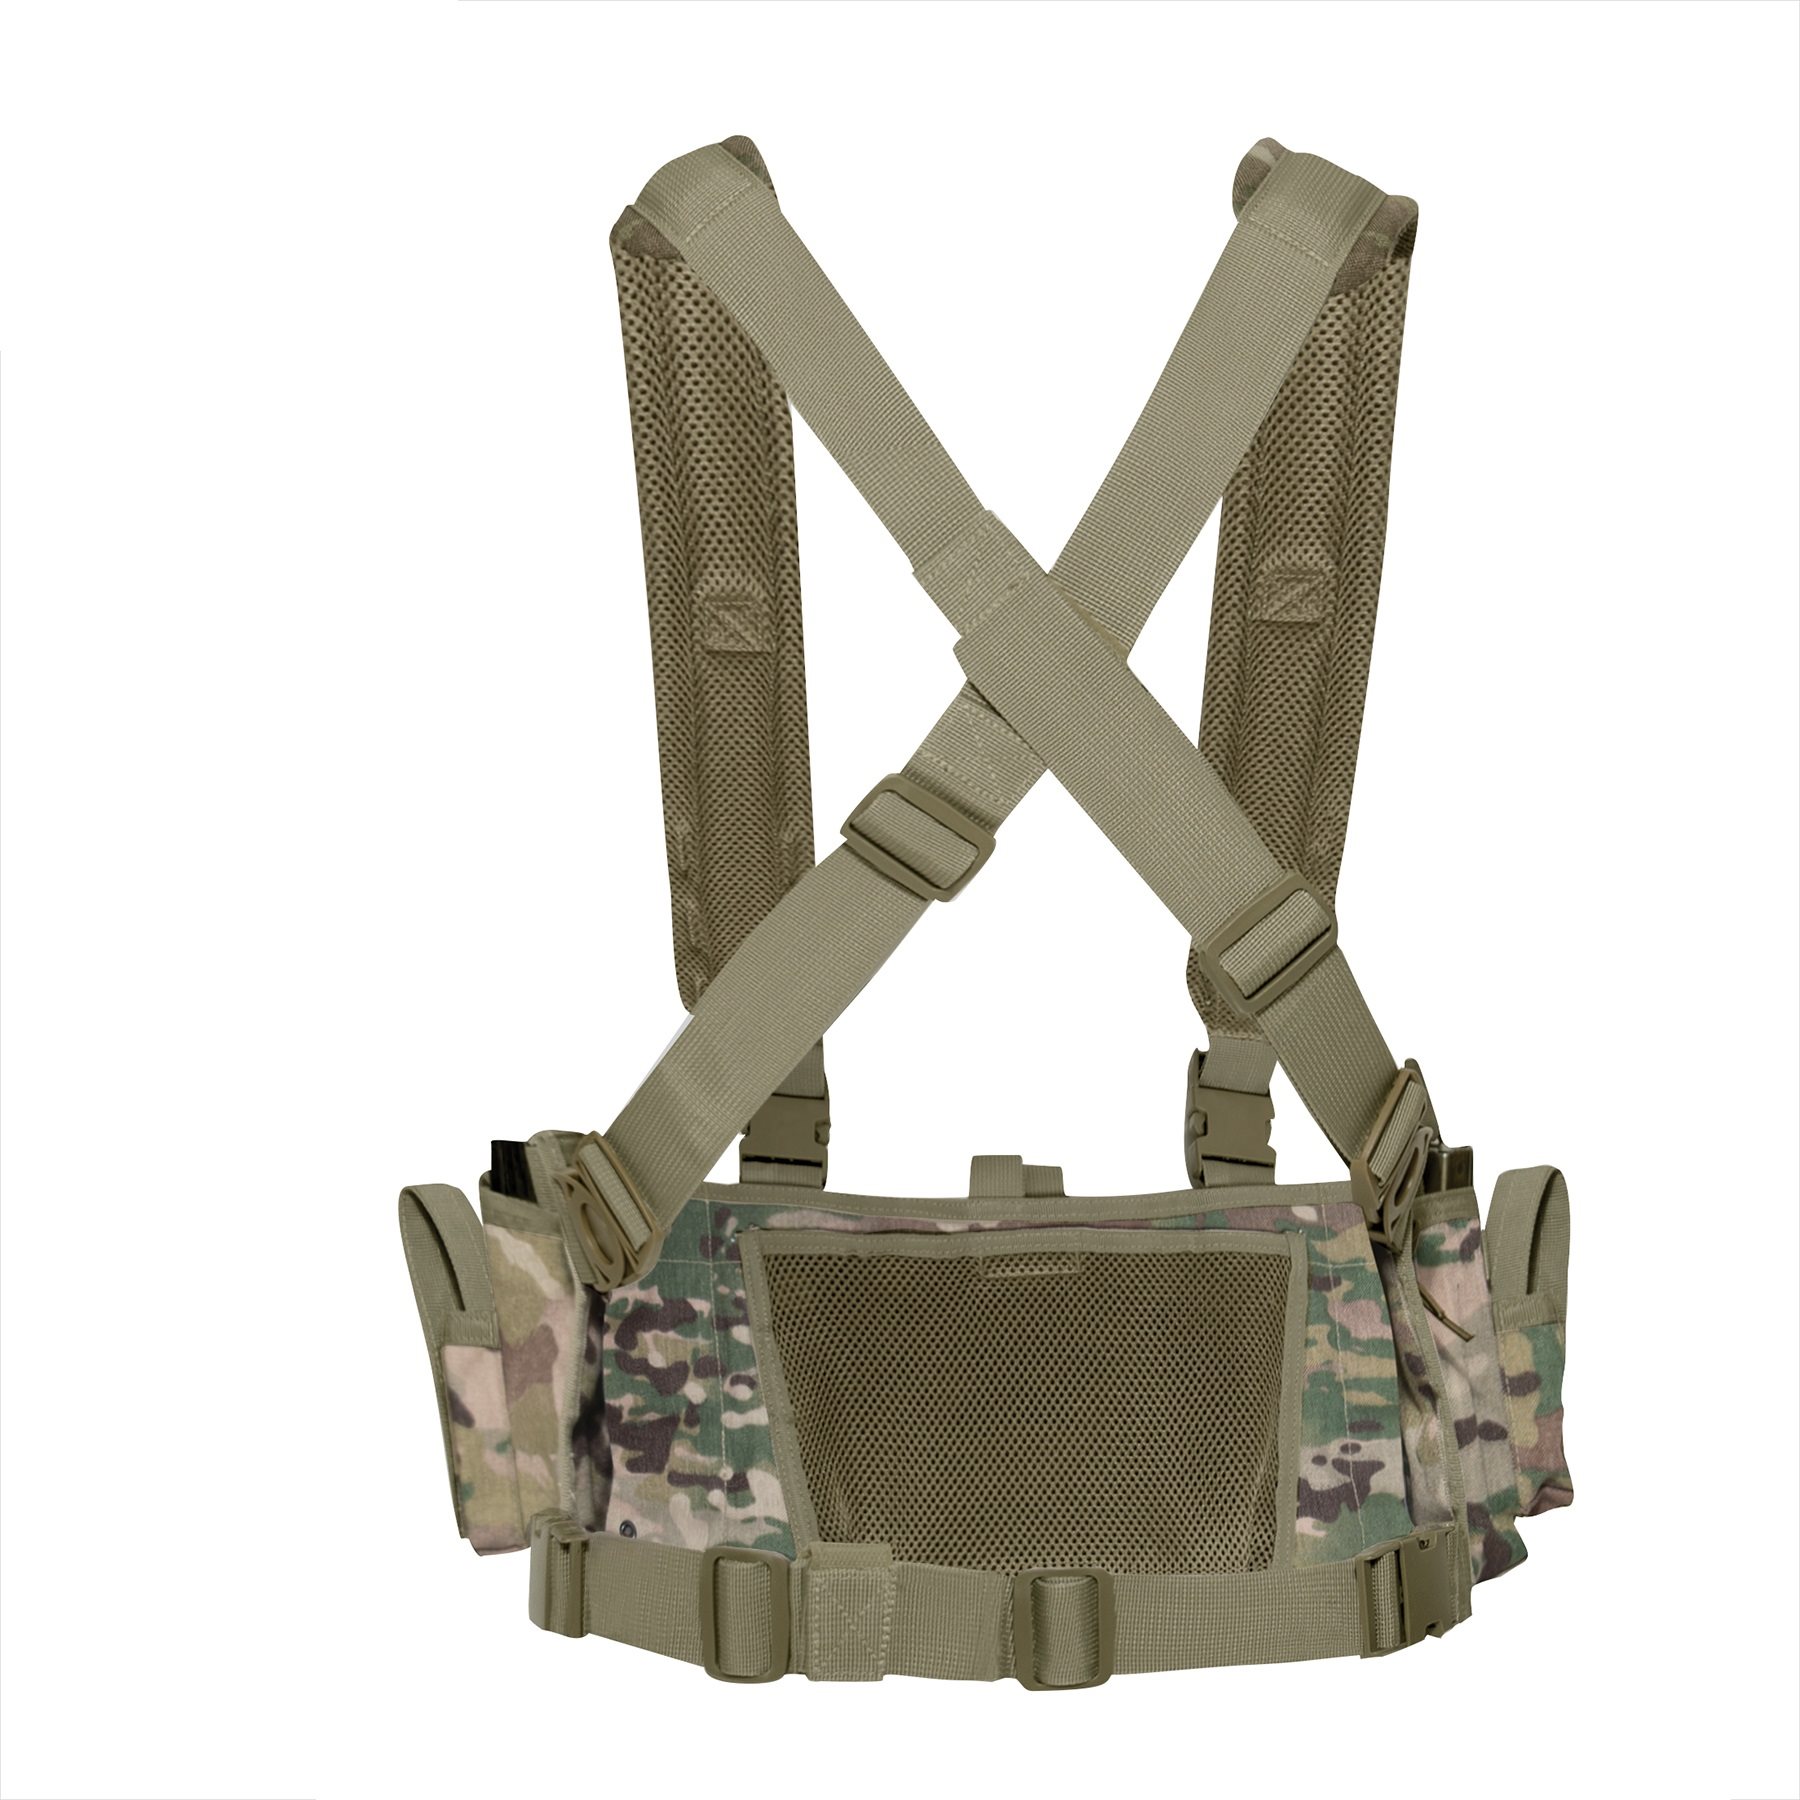 ROTHCO Operators Tactical Chest Rig MULTICAM | Army surplus MILITARY RANGE